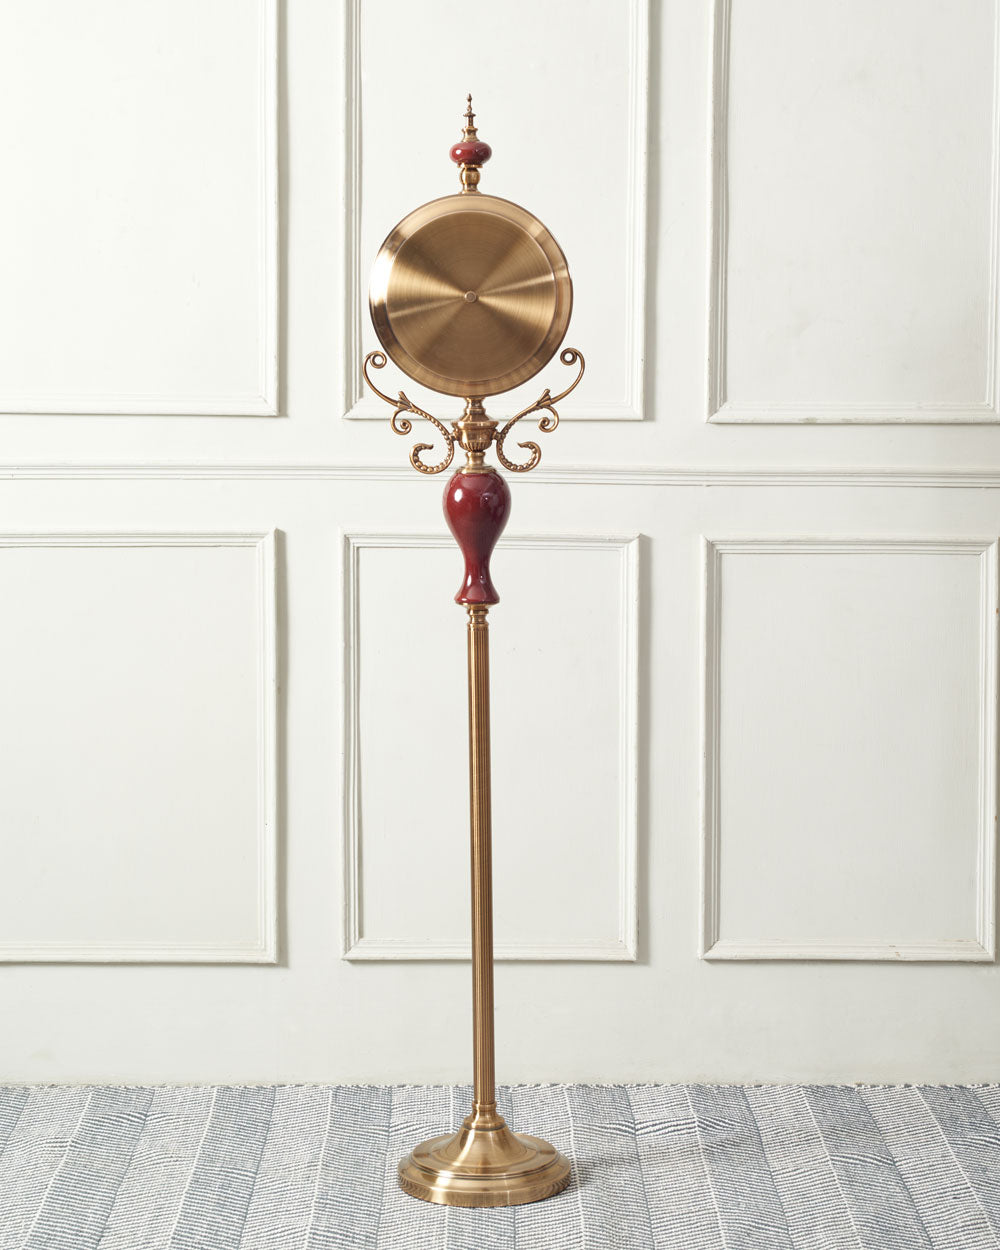 Majestic 'Seville' gold floor clock with a red accent, enhancing the ambiance of upscale living spaces.